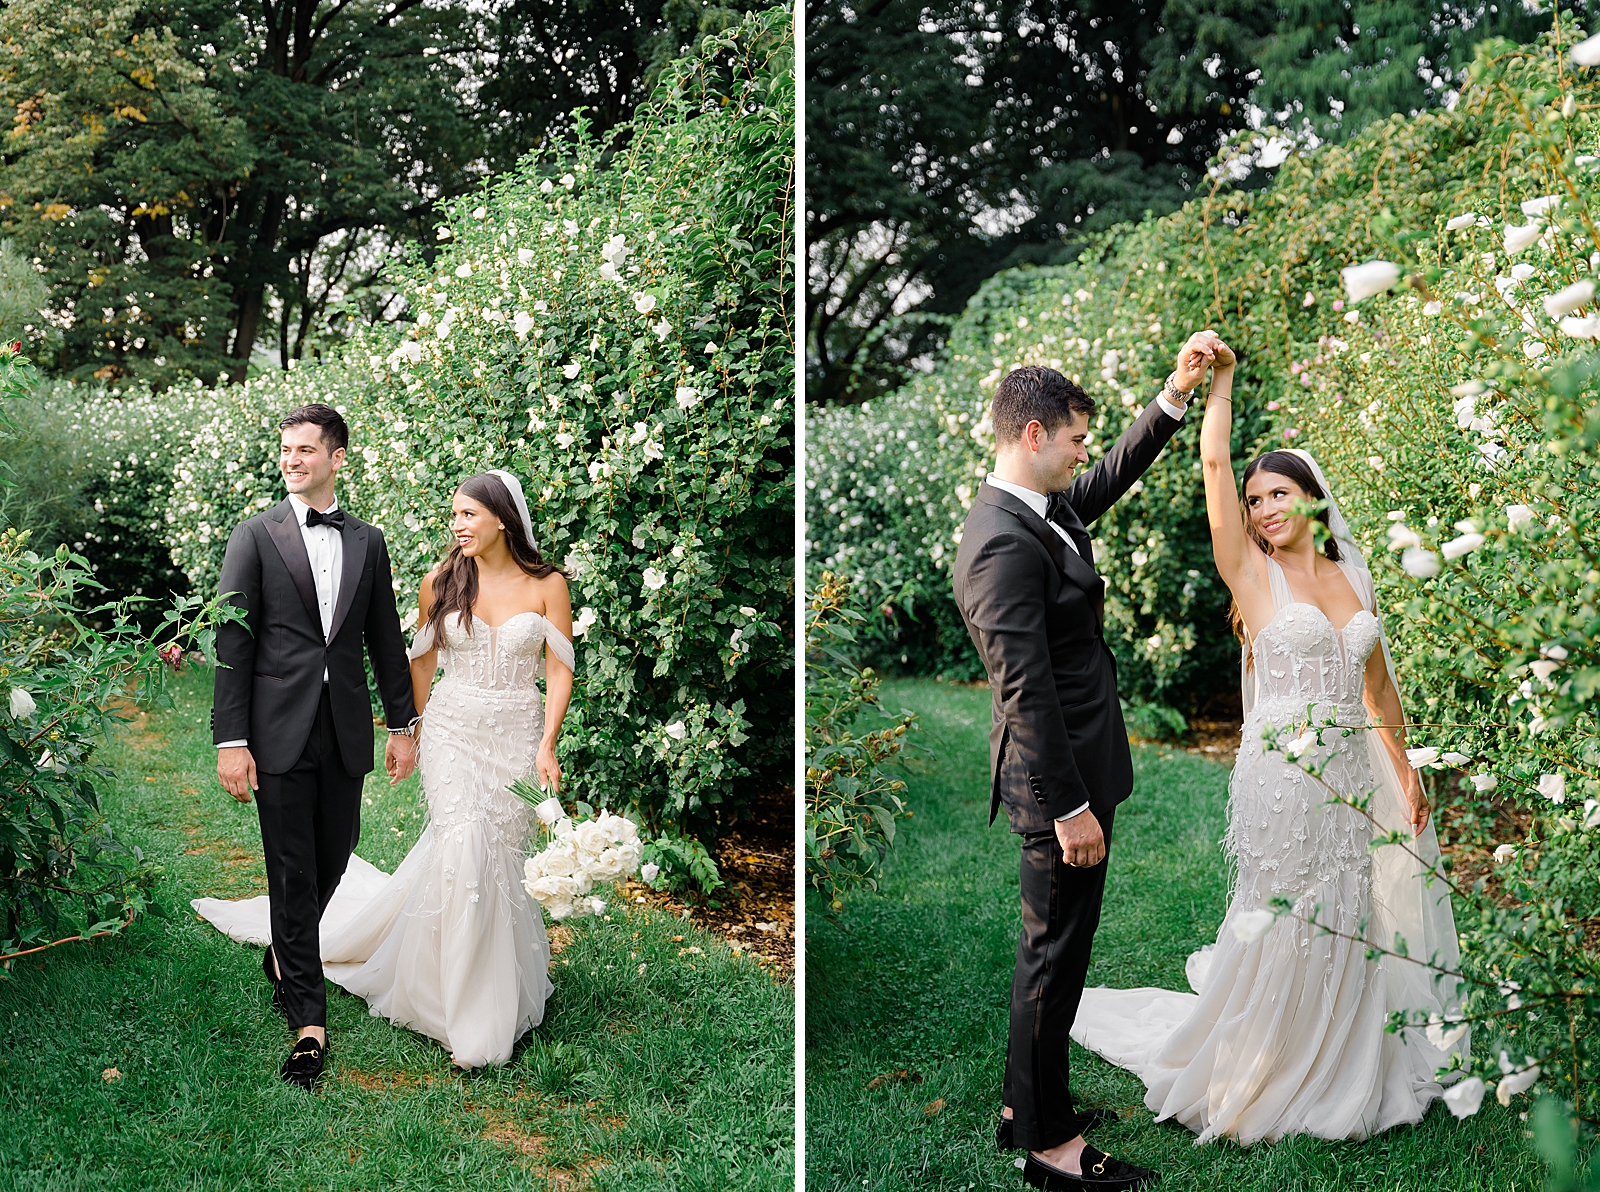 Left photo: Full body shot of the bride and groom holding hands in front of a flower bush. 
Right photo: Full body shot of the groom spinning his bride in front of a flower bush. 